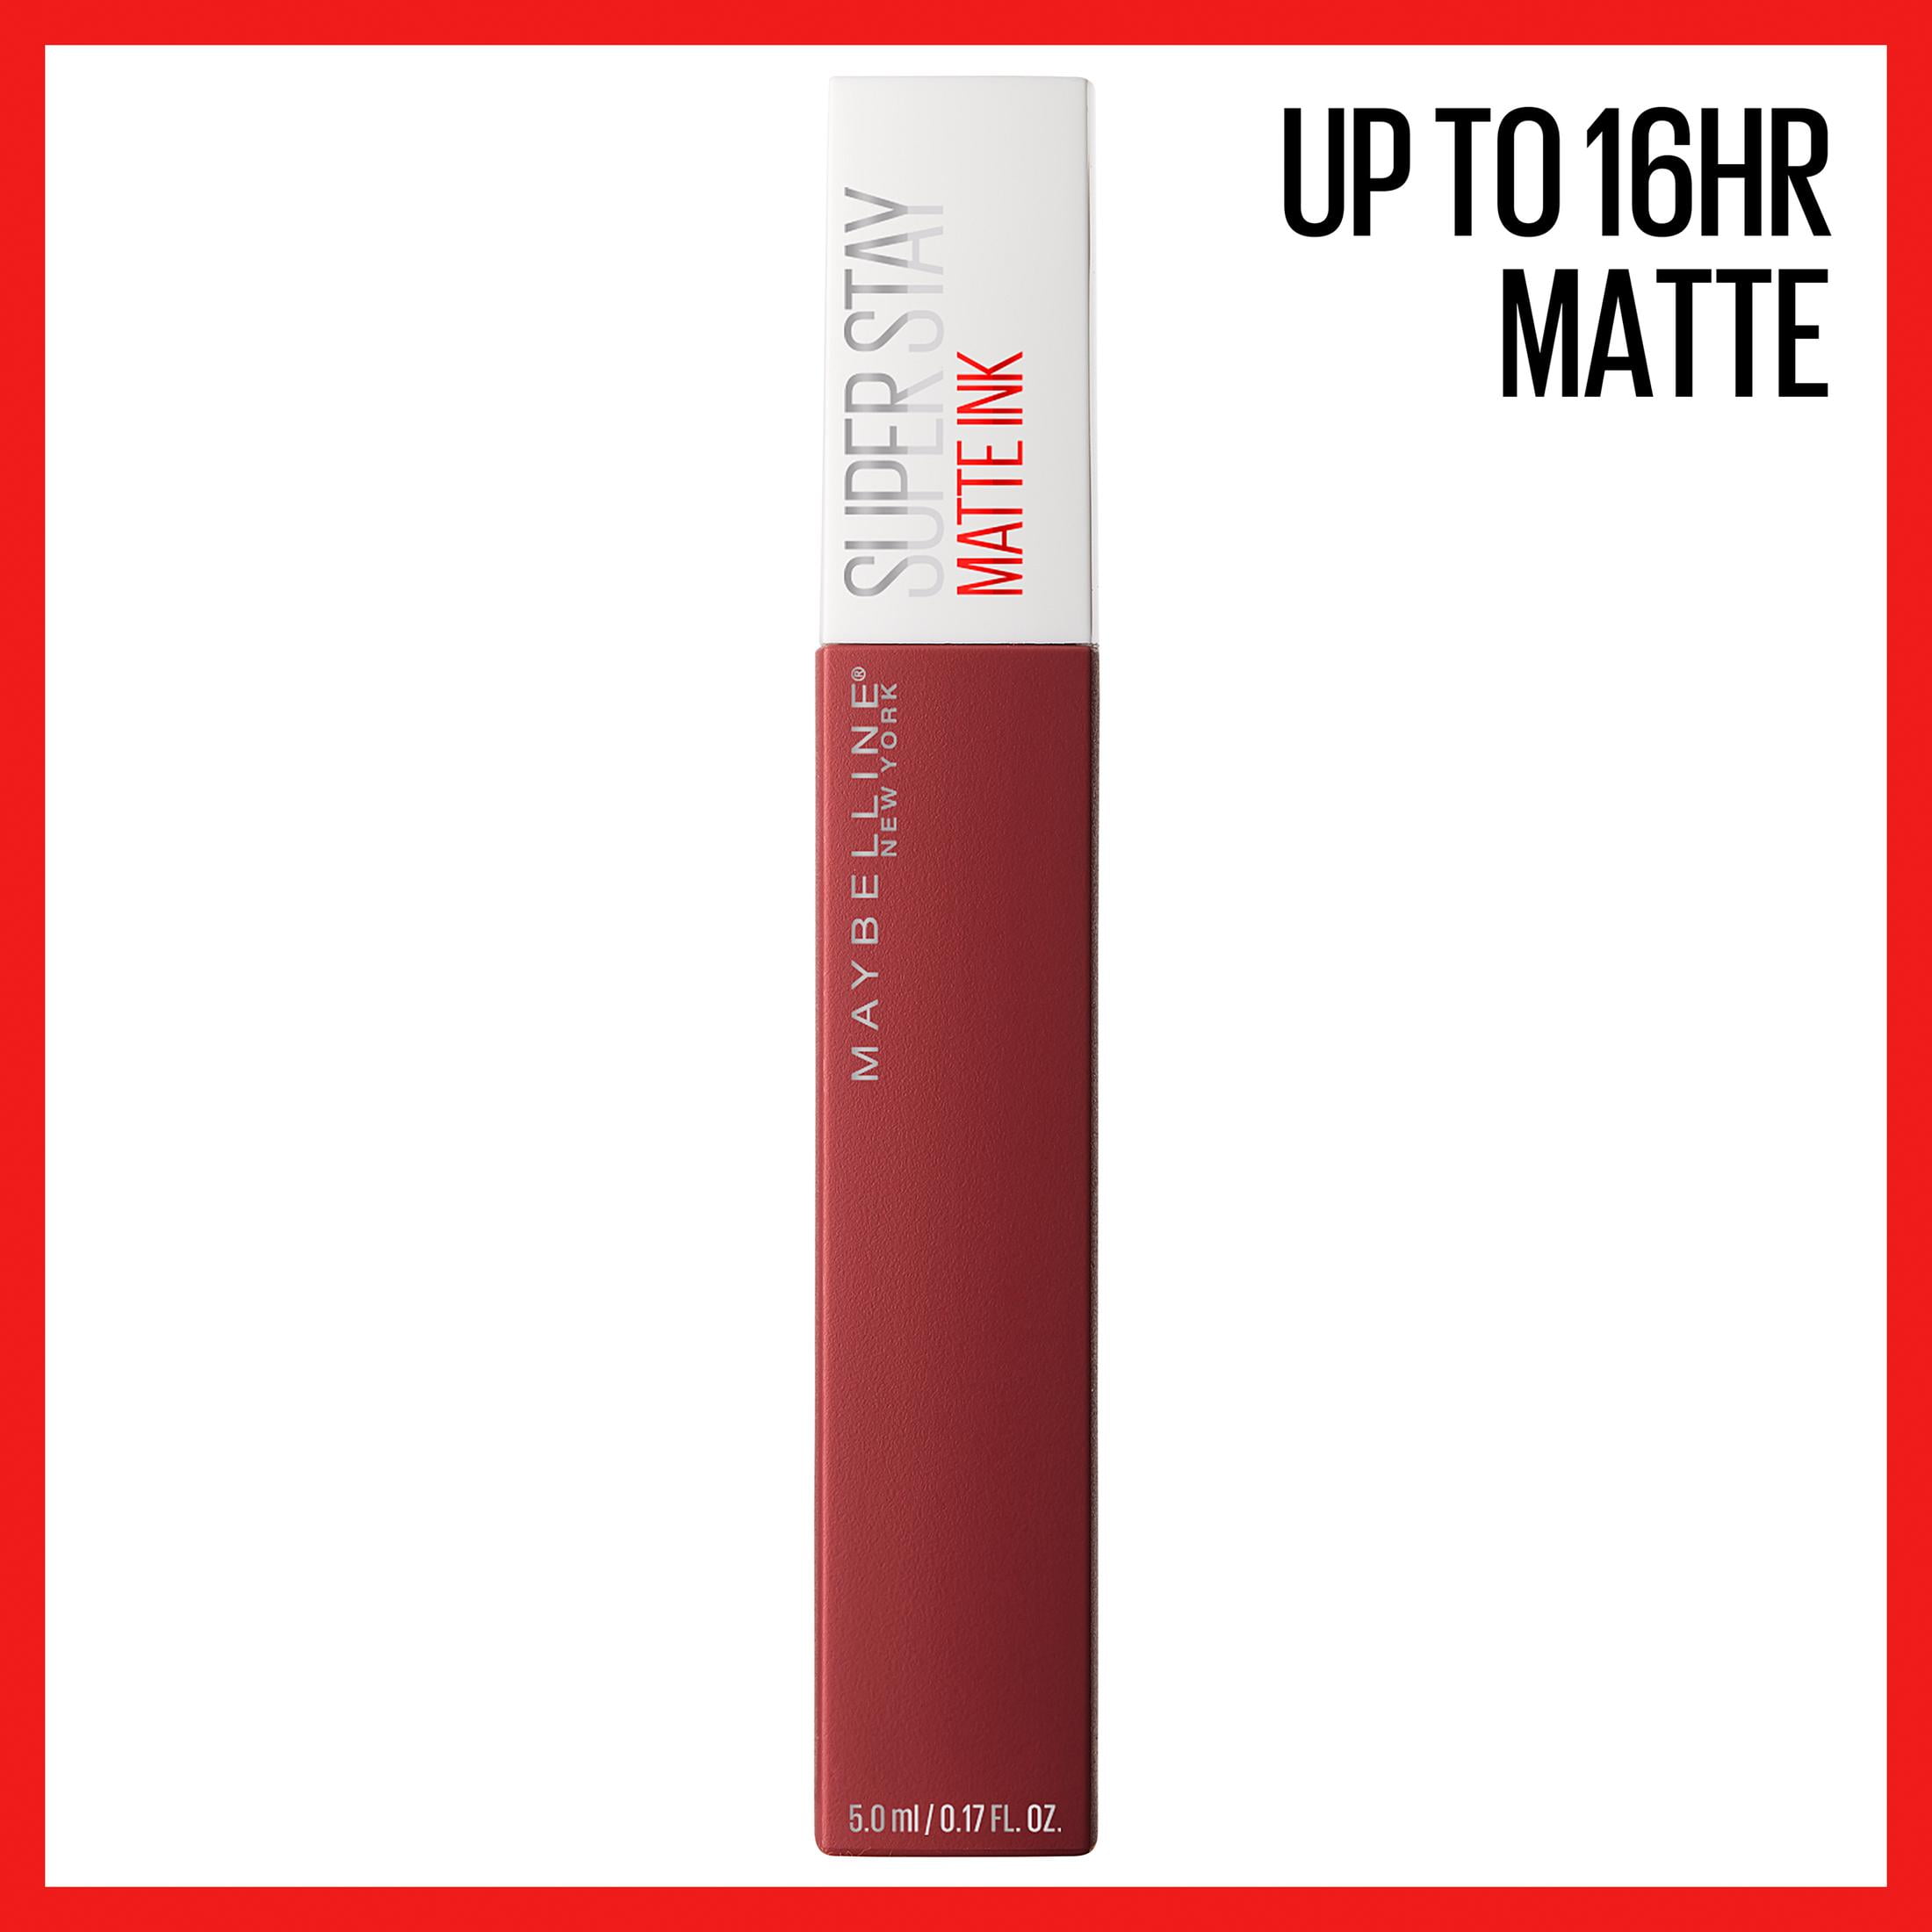 Maybelline Super Stay Matte Ink Liquid Lipstick Makeup, Long Lasting High  Impact Color, Up to 16H Wear, Founder, Cranberry Red, 1 Count